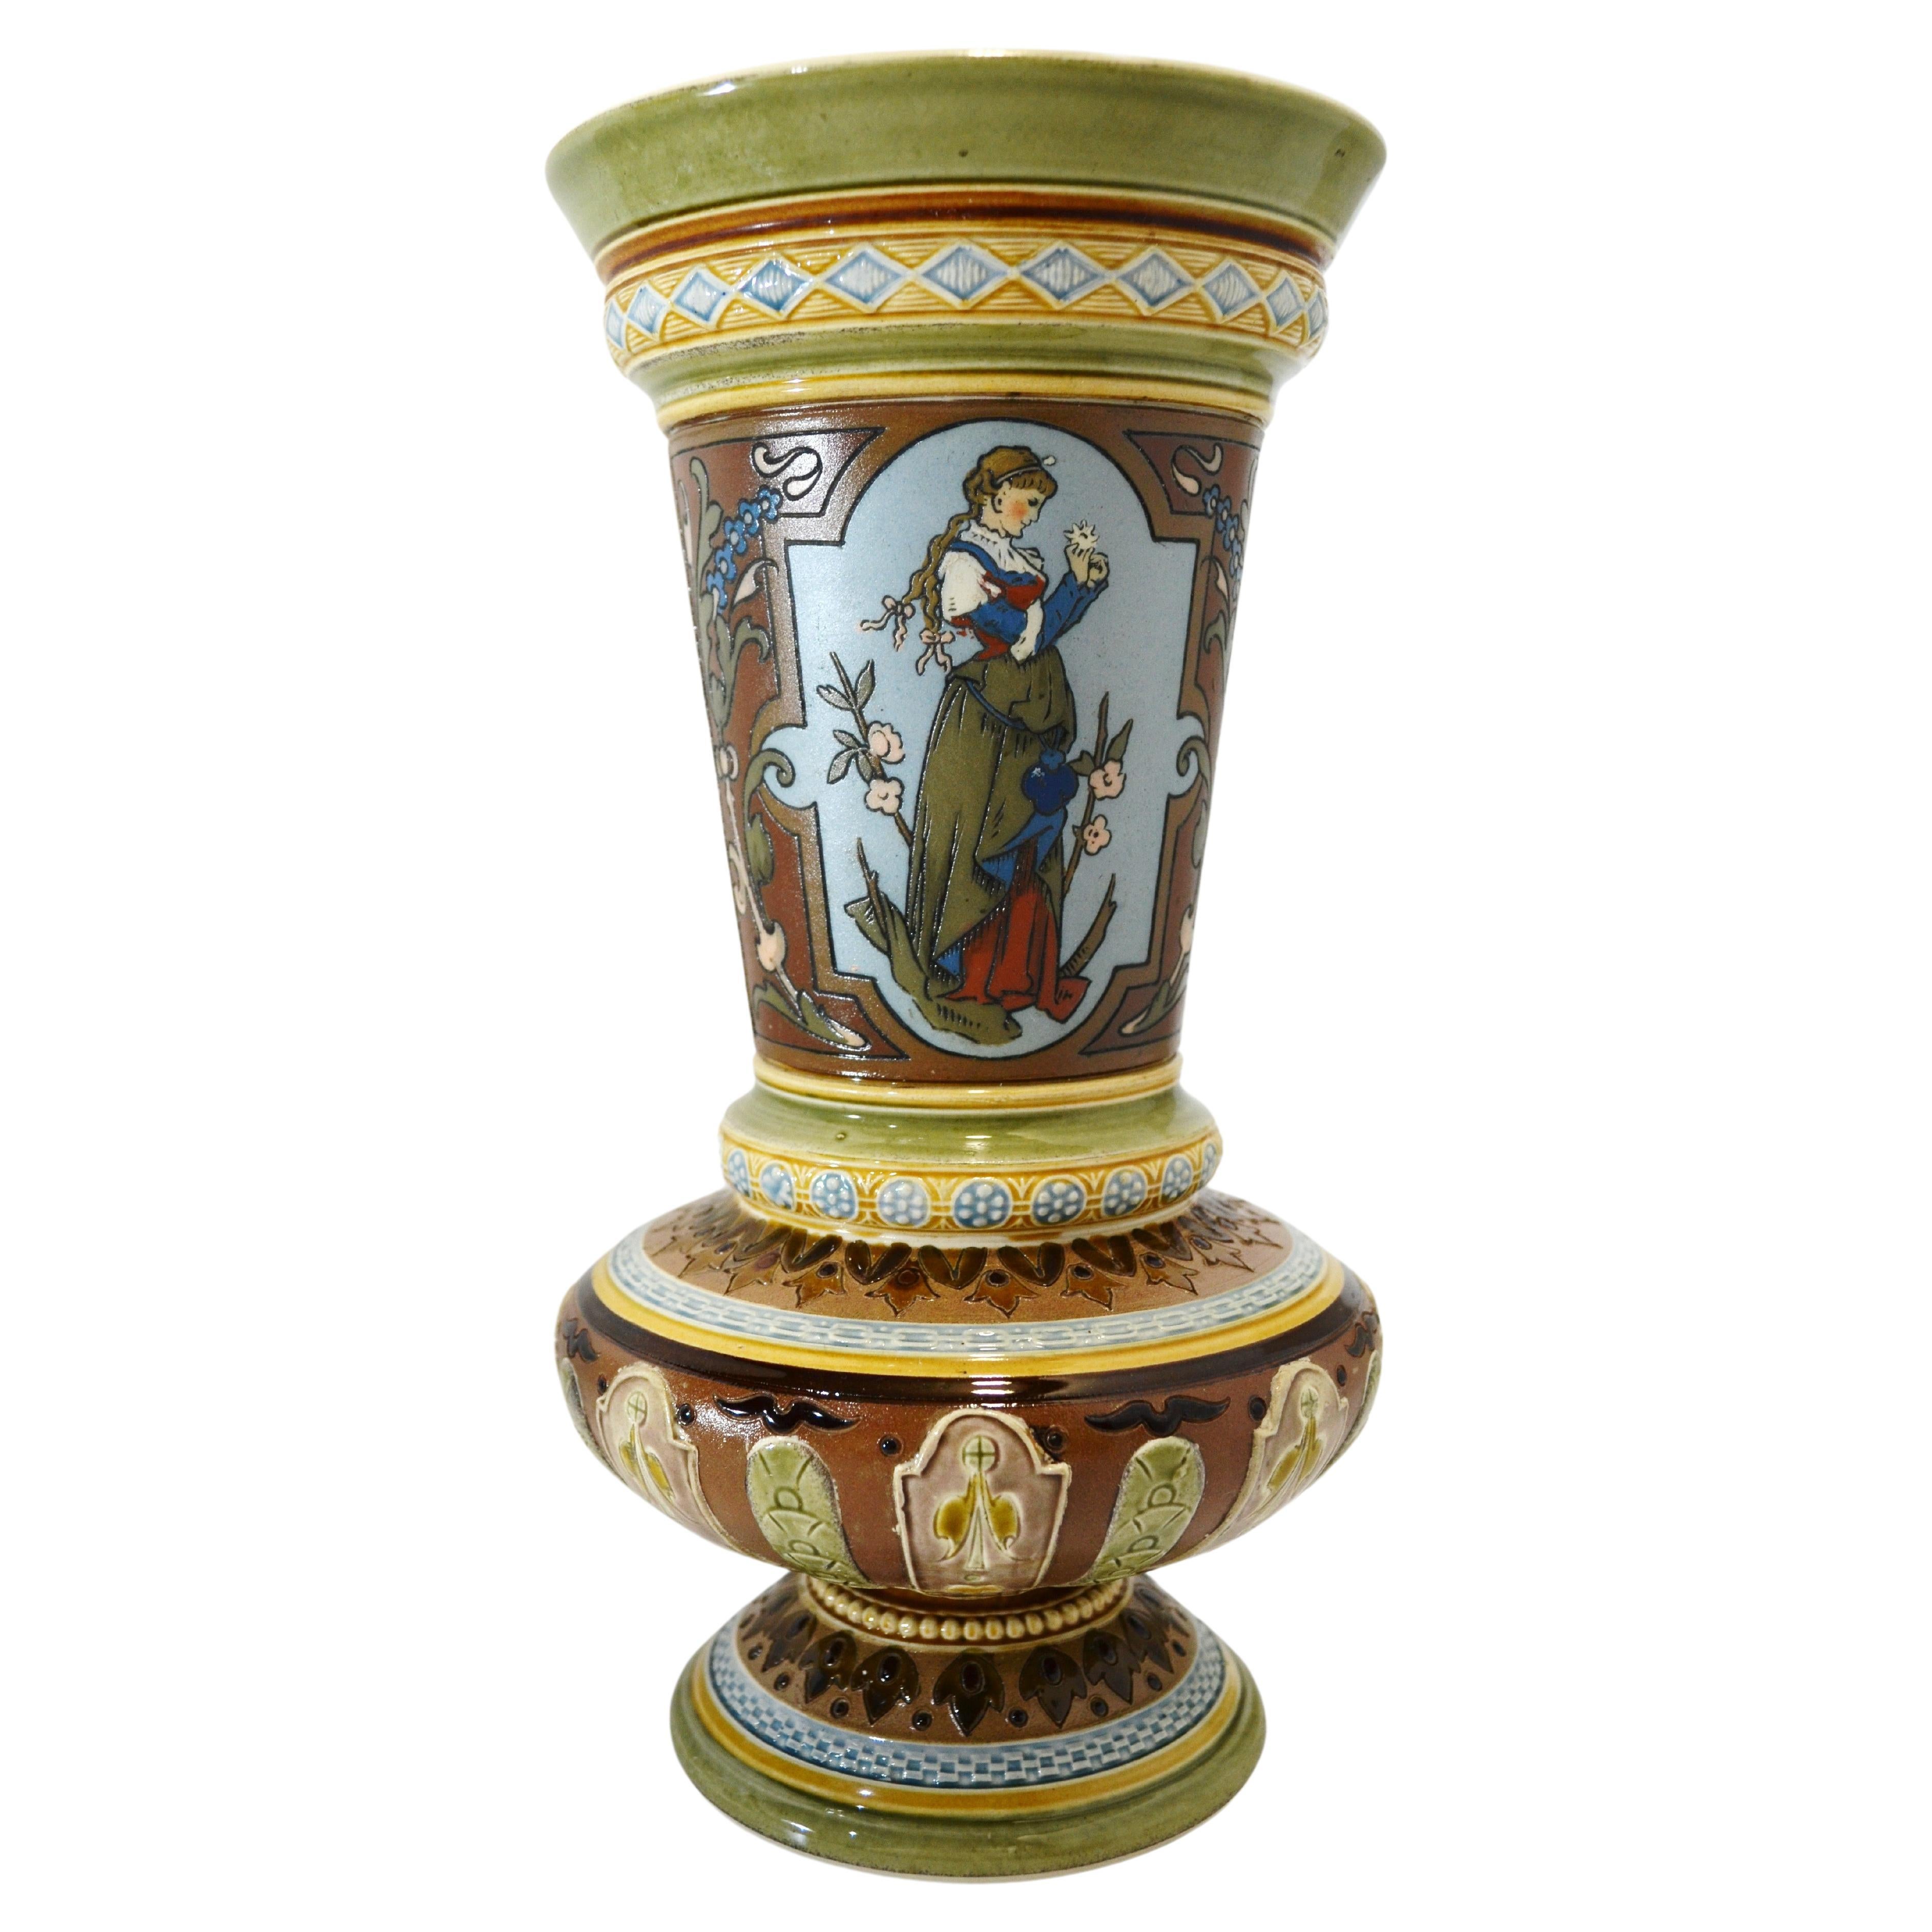 Villeroy and Boch Mettlach 1890 1900 Mosaic Ceramic Vase Decorated with Women